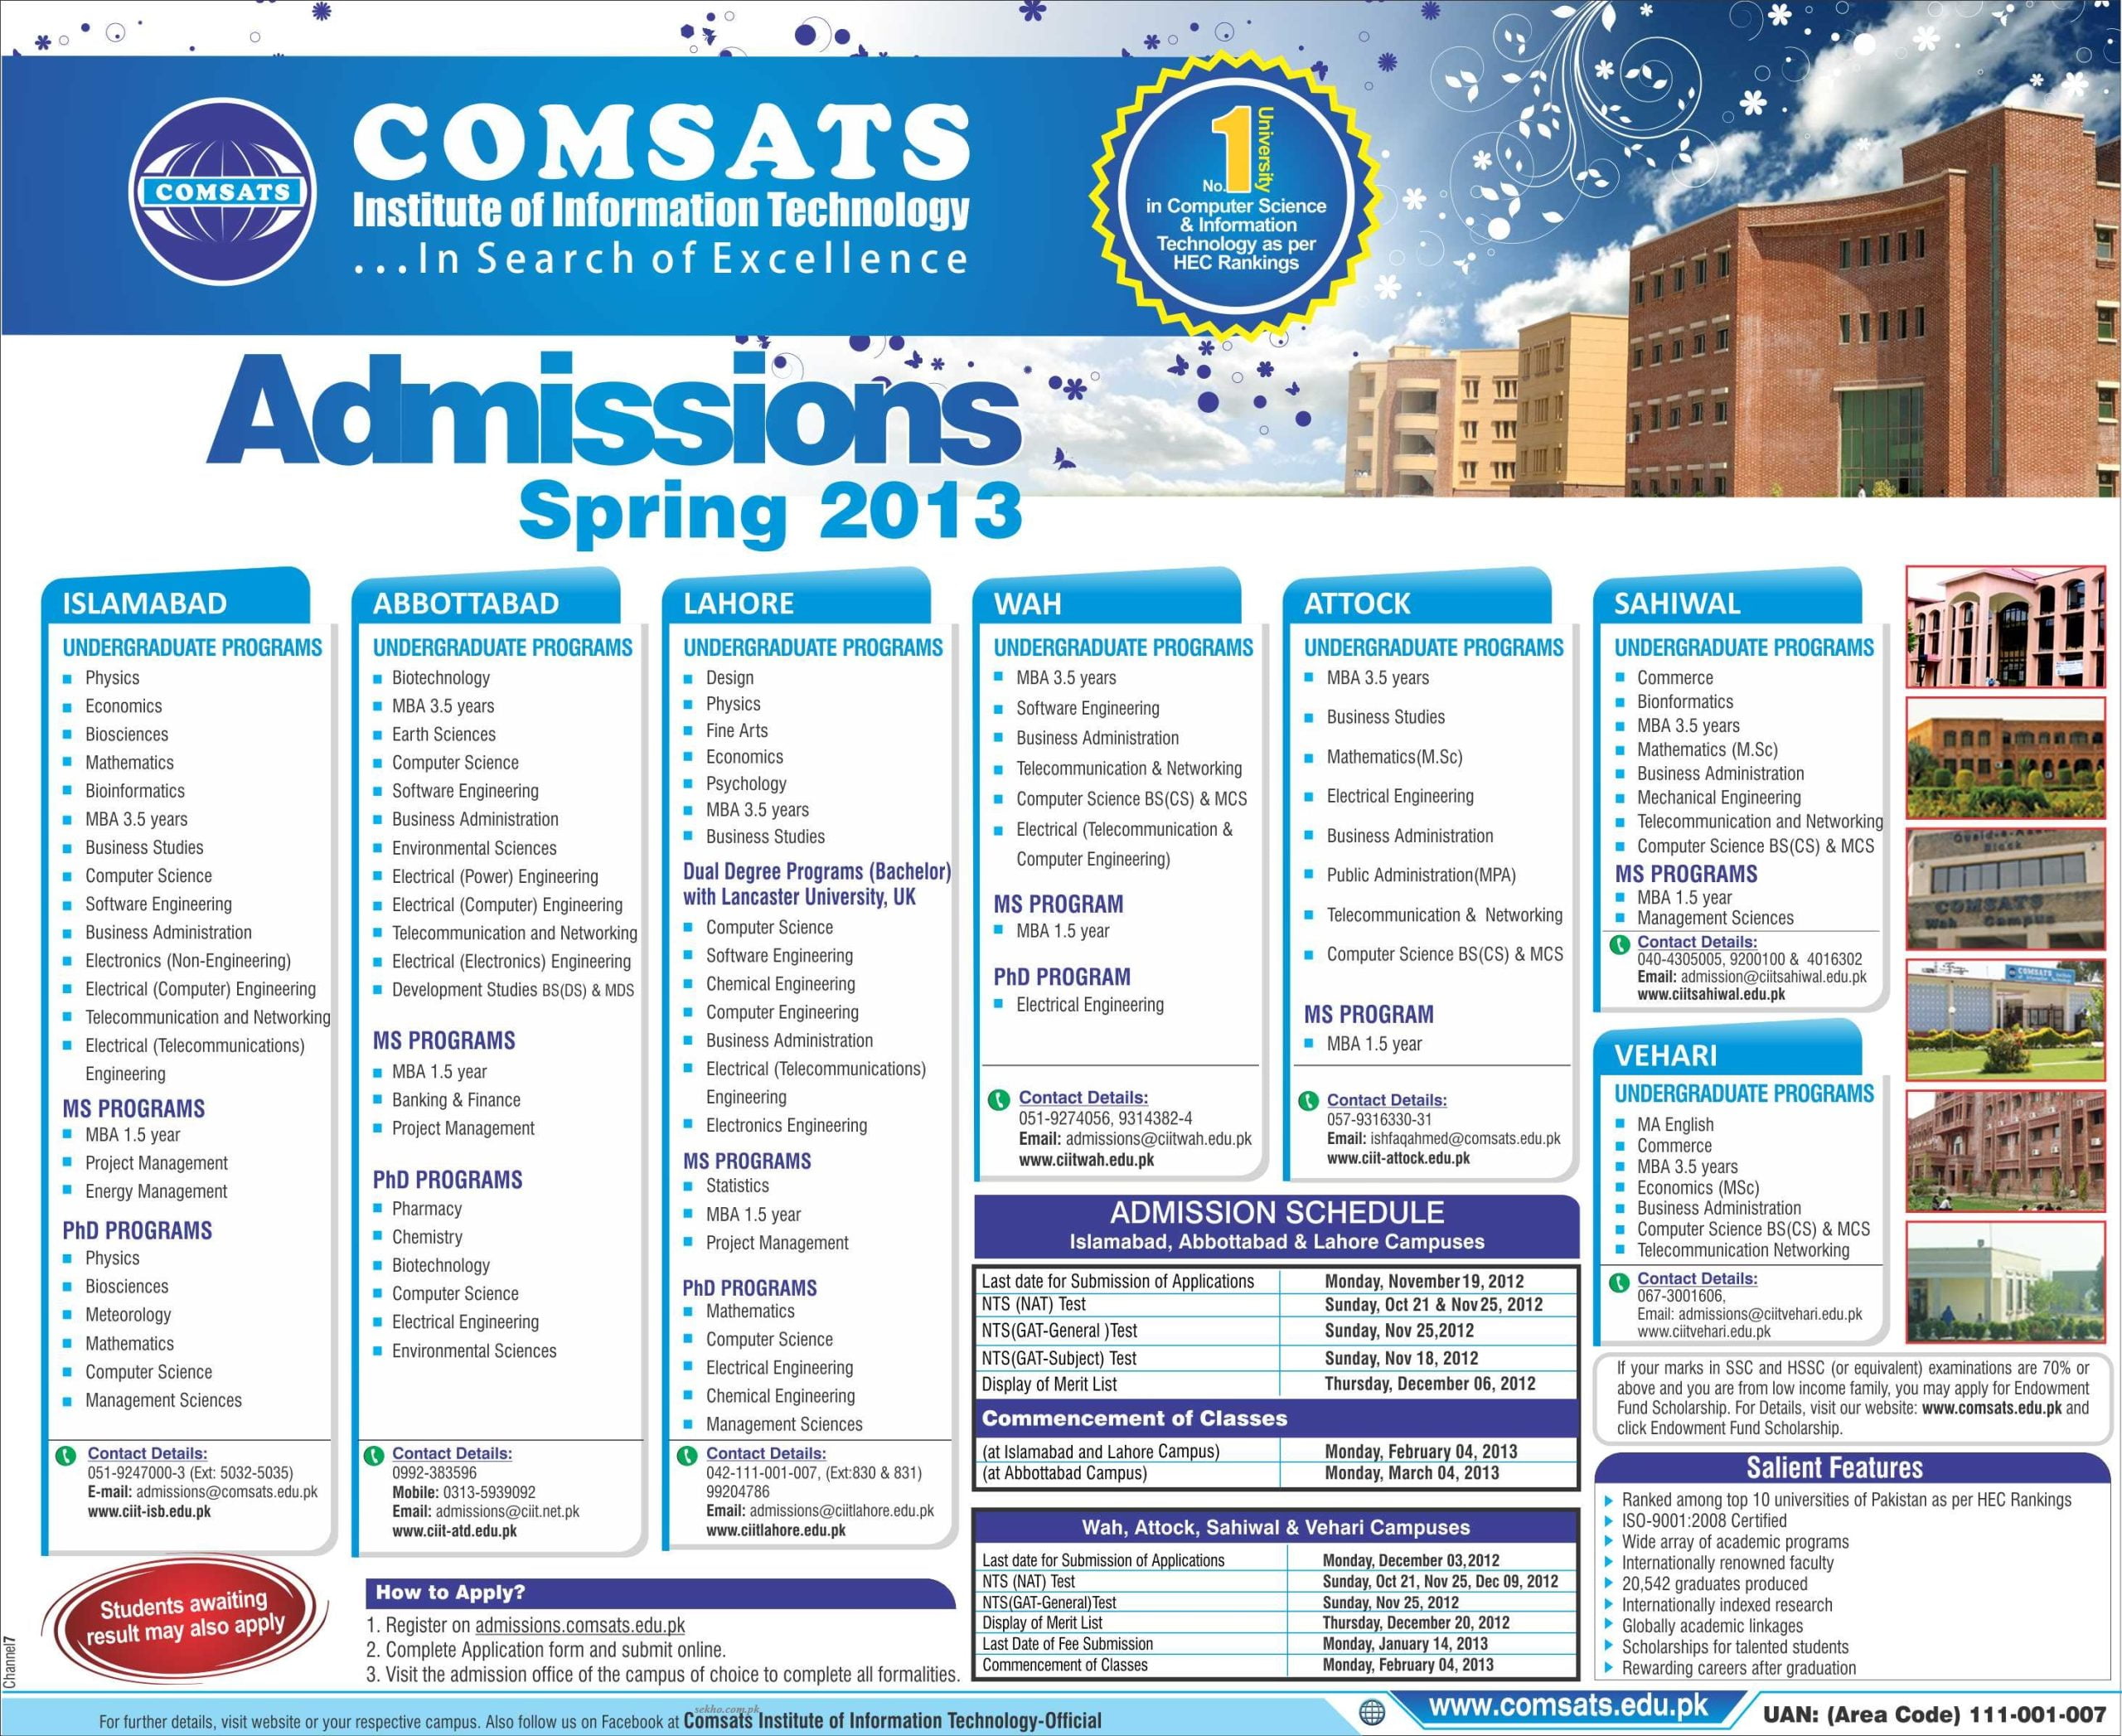 Comsats Institute Of Information Technology Spring Admissions 2013